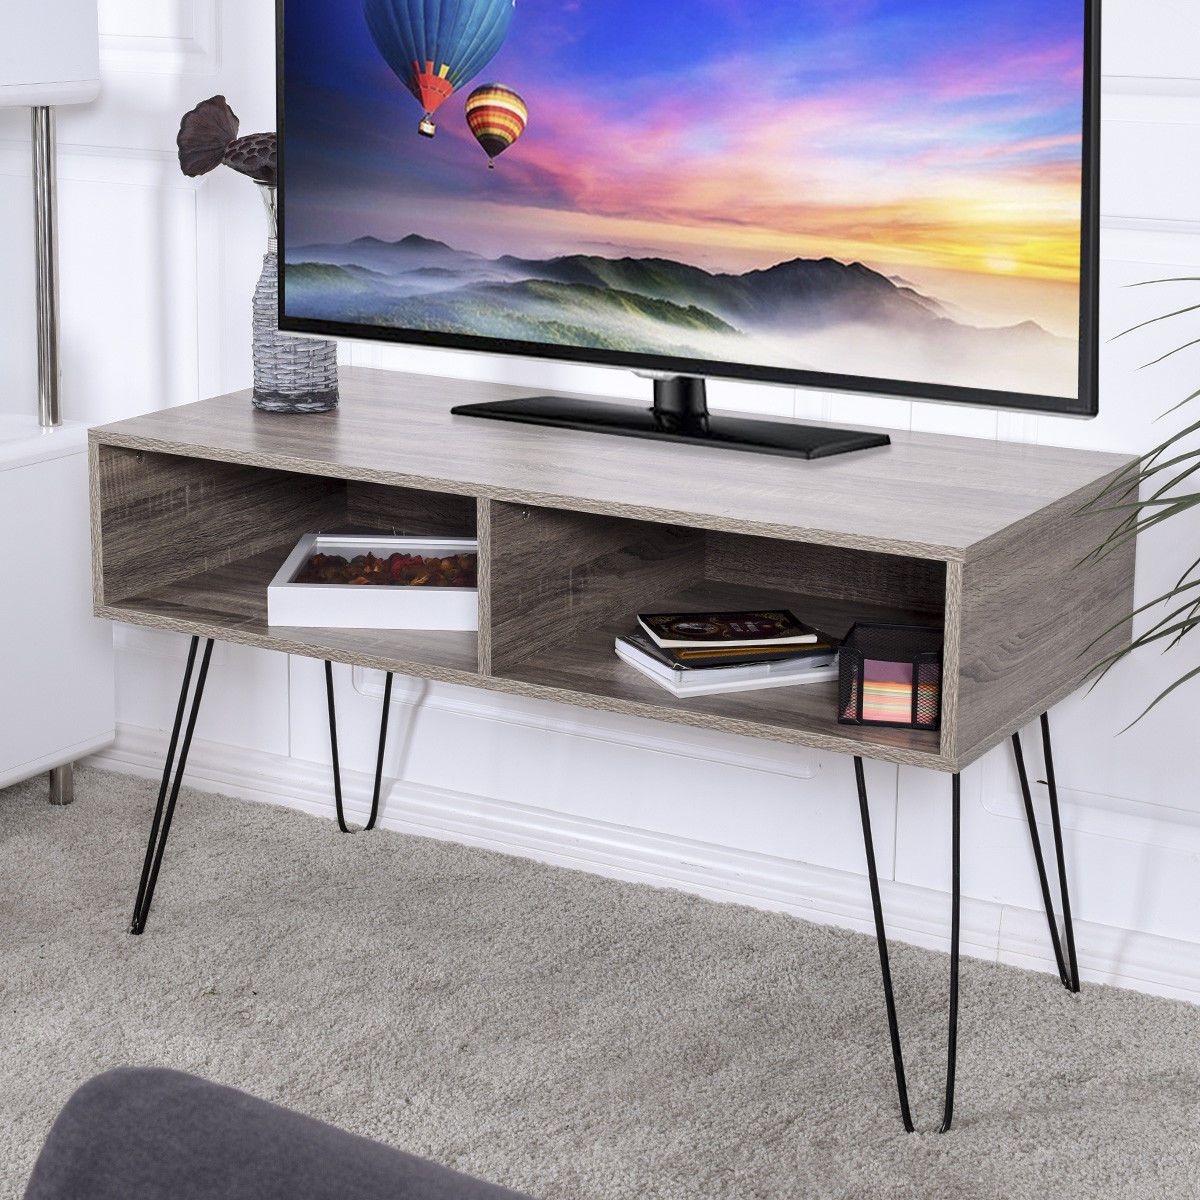 Aliexpress : Buy Giantex Modern Tv Stand Wood Media With Regard To Metal And Wood Tv Stands (View 4 of 15)